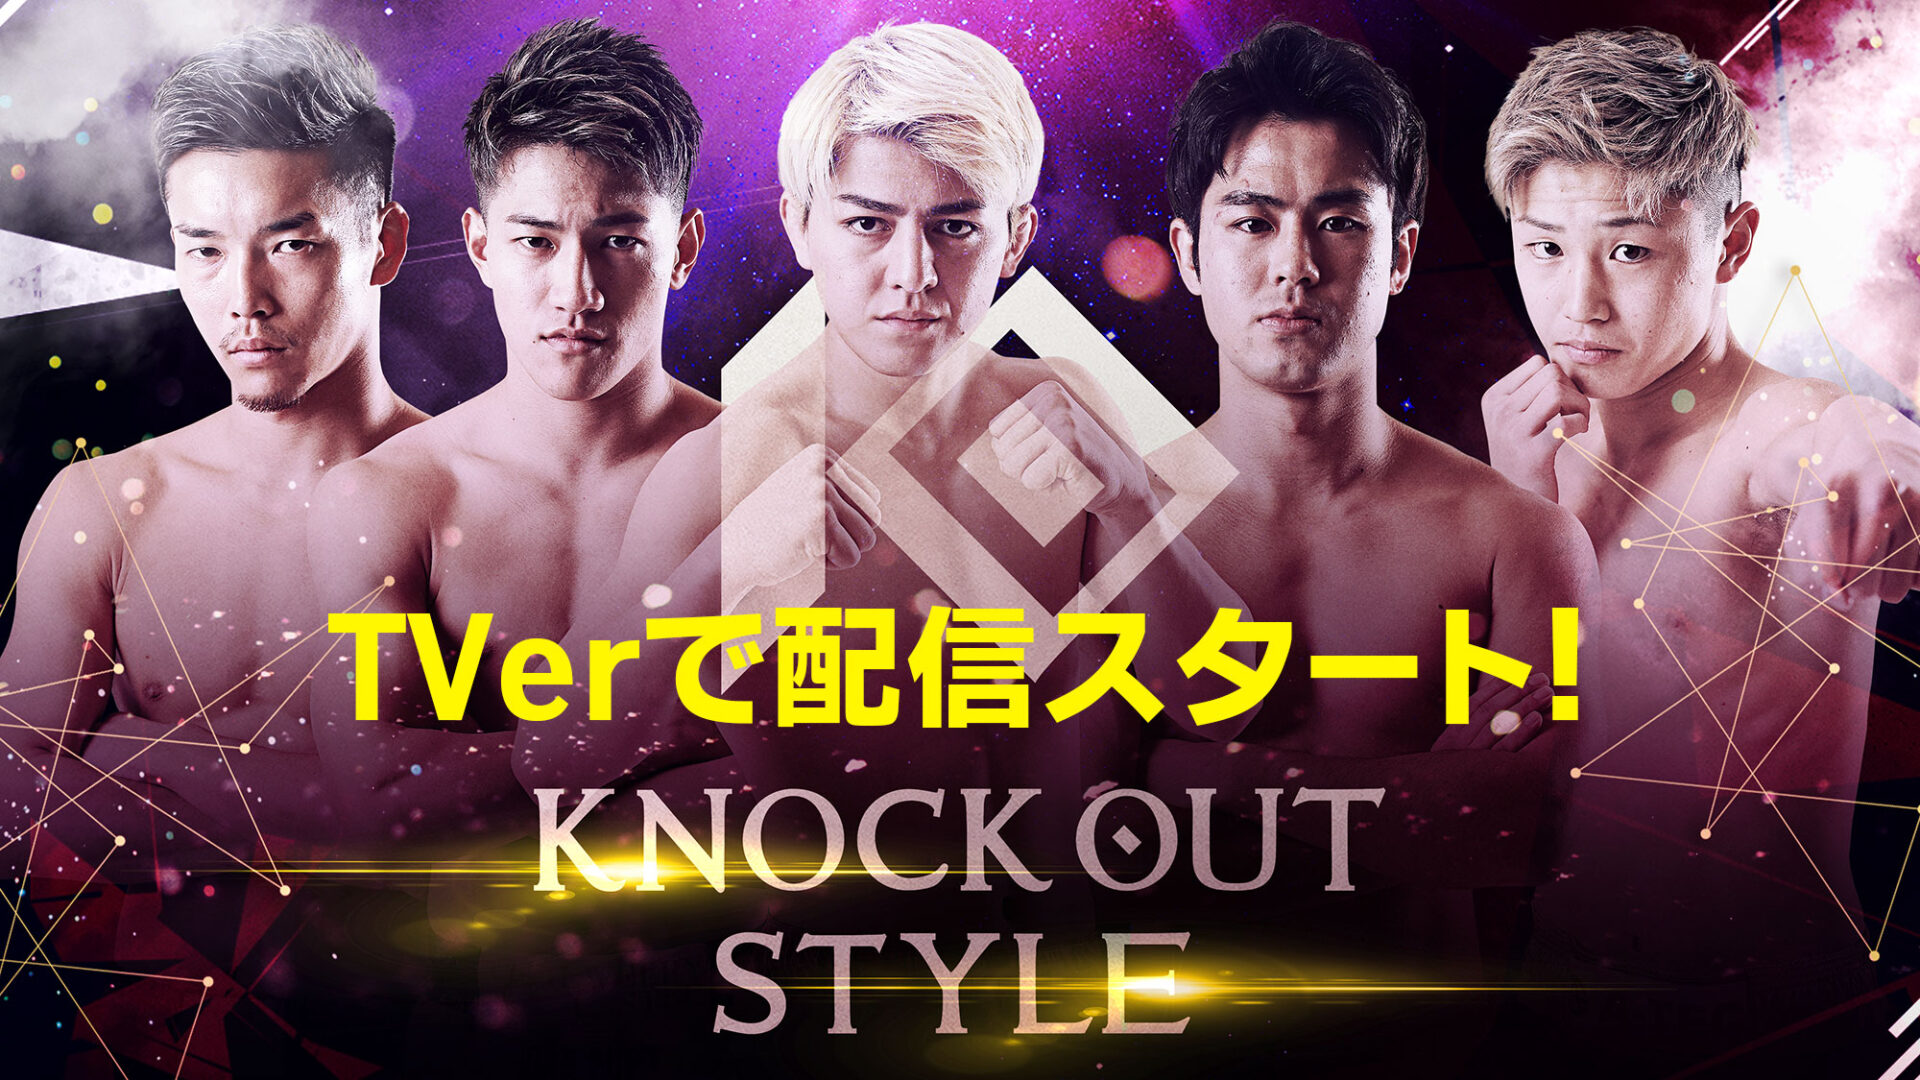 「KNOCK OUT STYLE」がTVerで配信スタート！